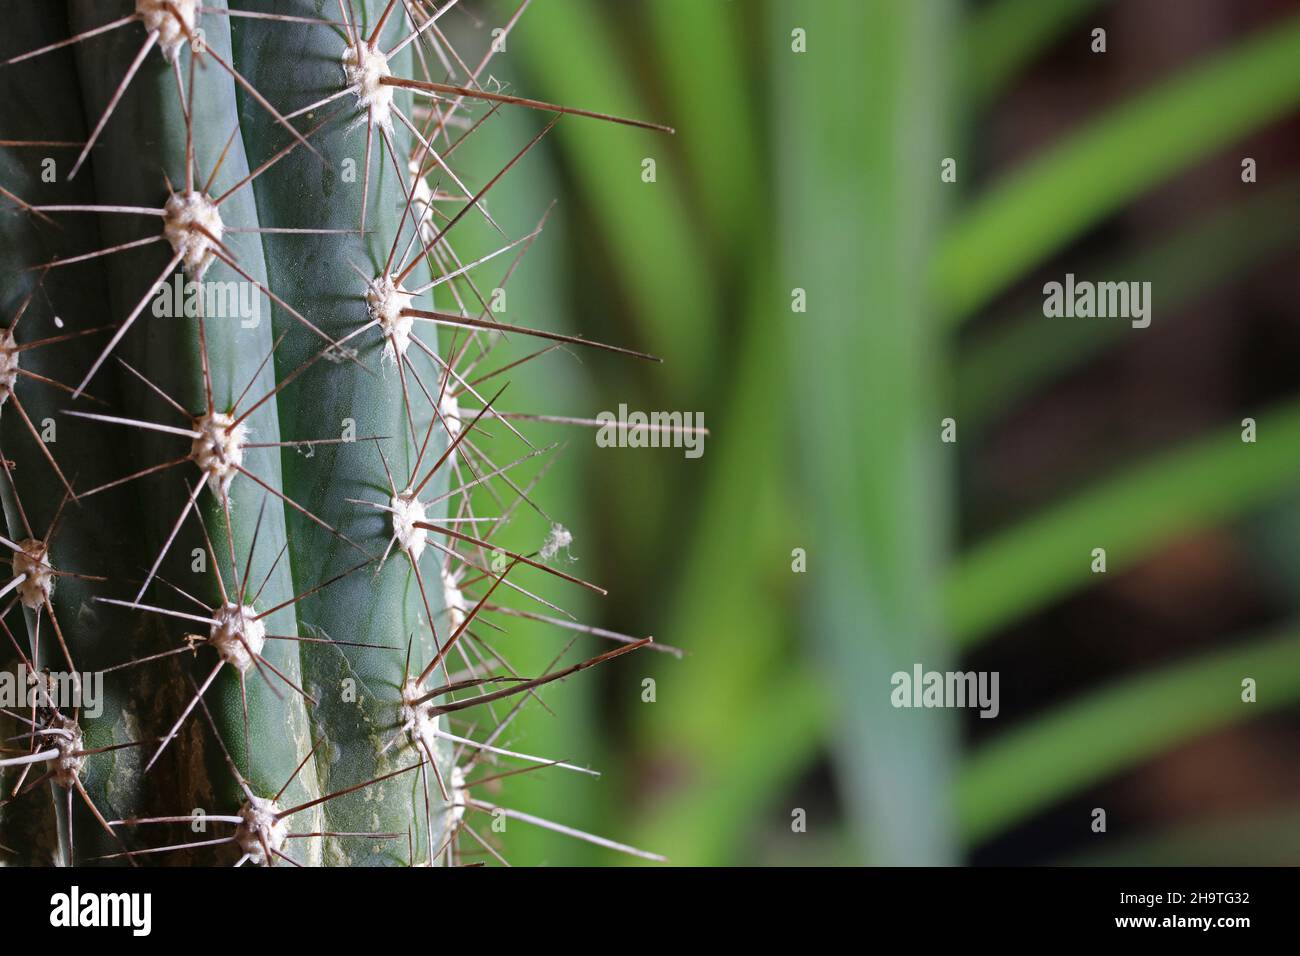 Spiny cactus on a blurred background Stock Photo